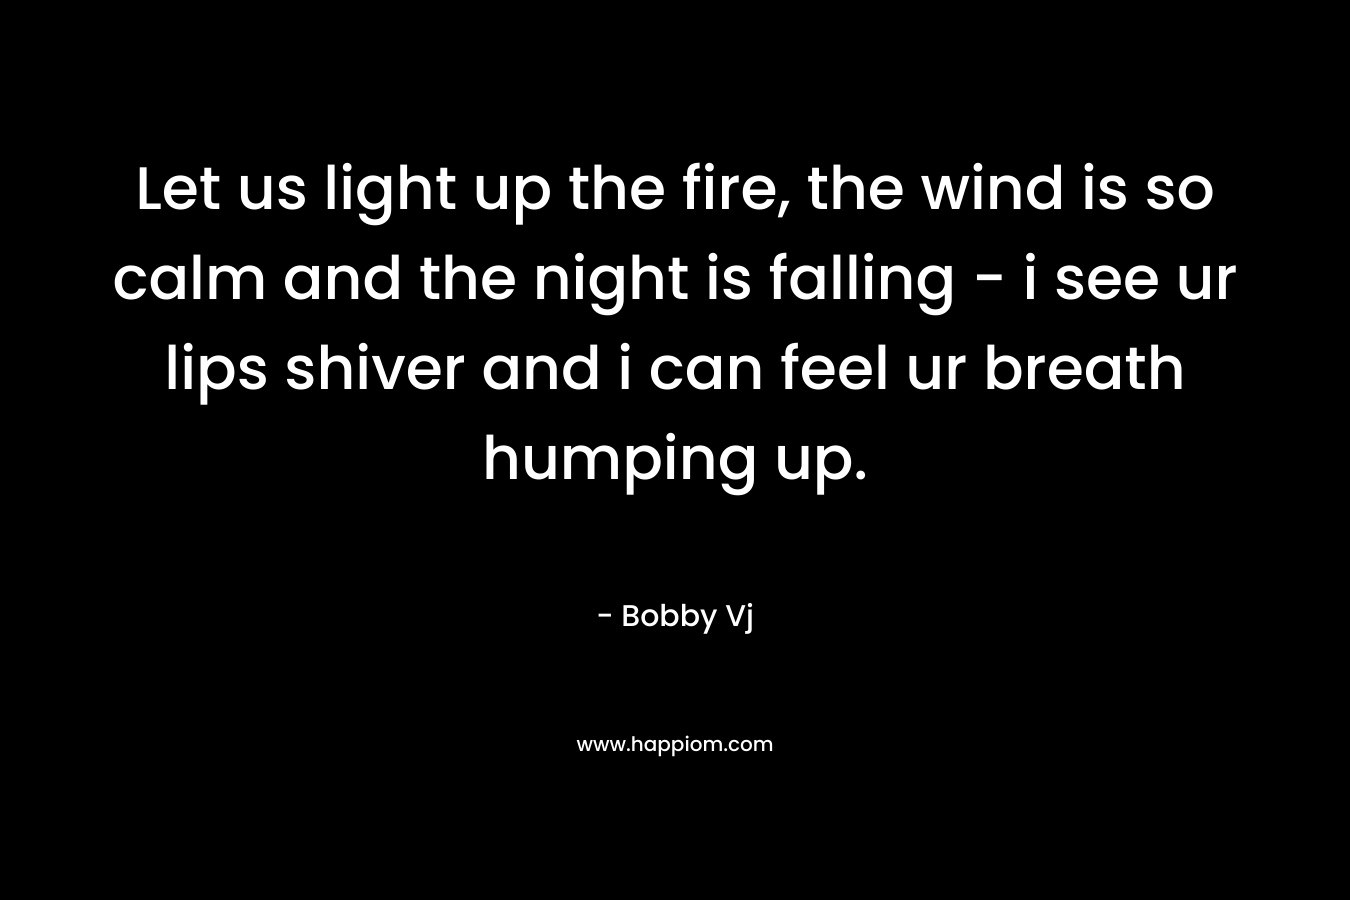 Let us light up the fire, the wind is so calm and the night is falling – i see ur lips shiver and i can feel ur breath humping up. – Bobby Vj